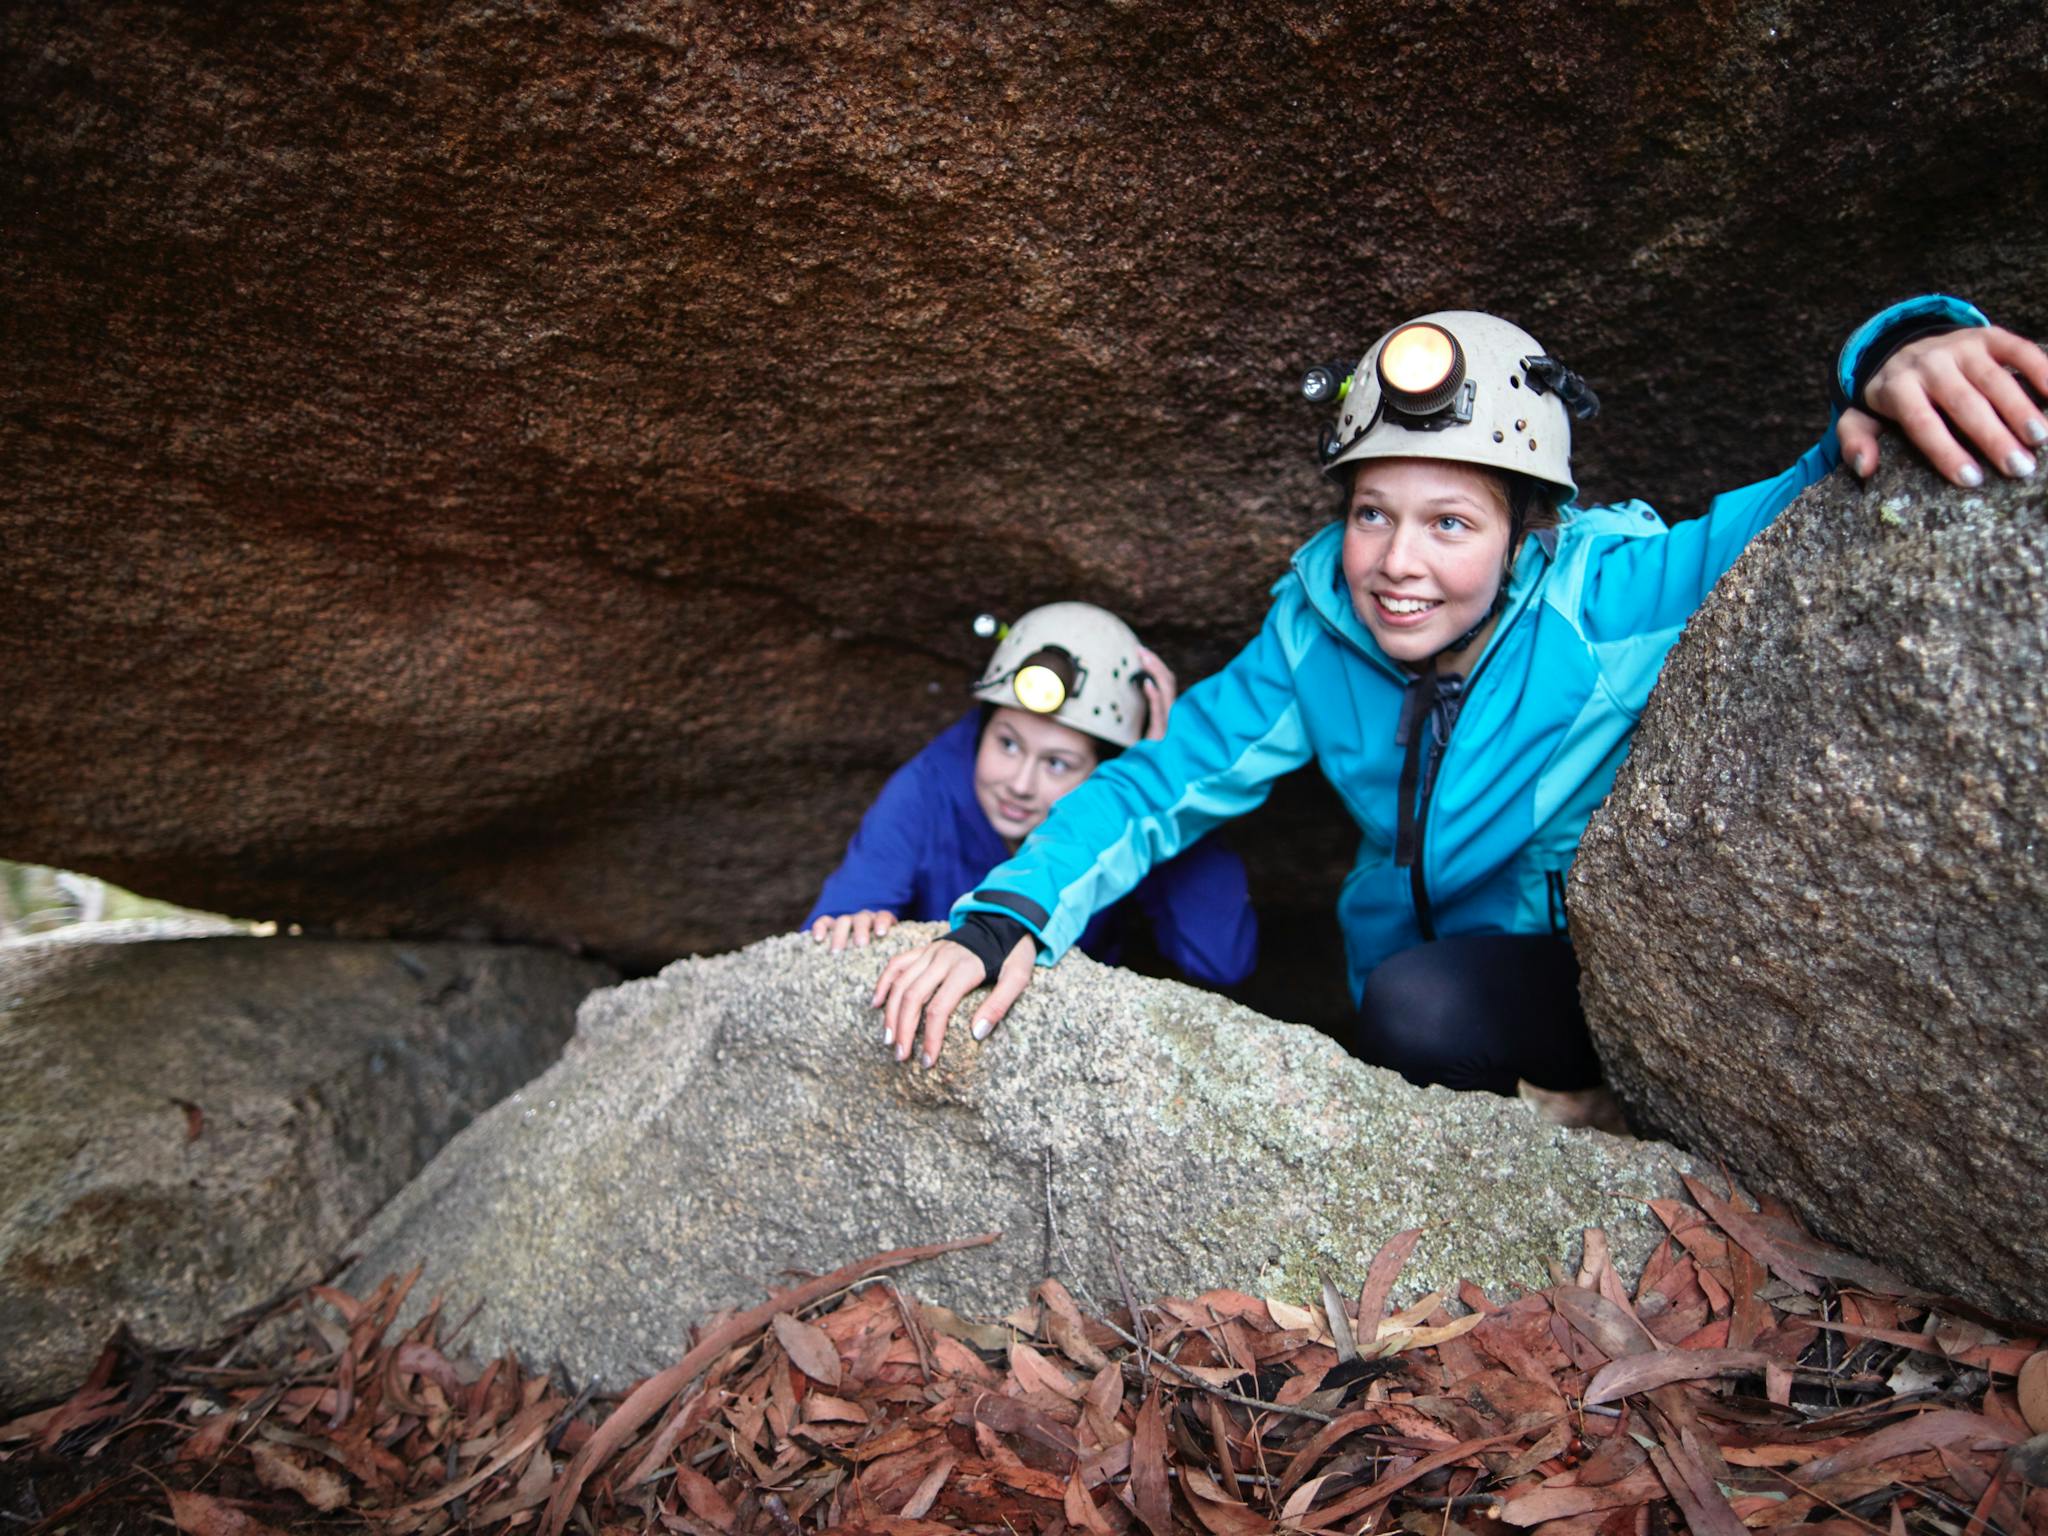 Underground River Caving in the Mount Buffalo National Park